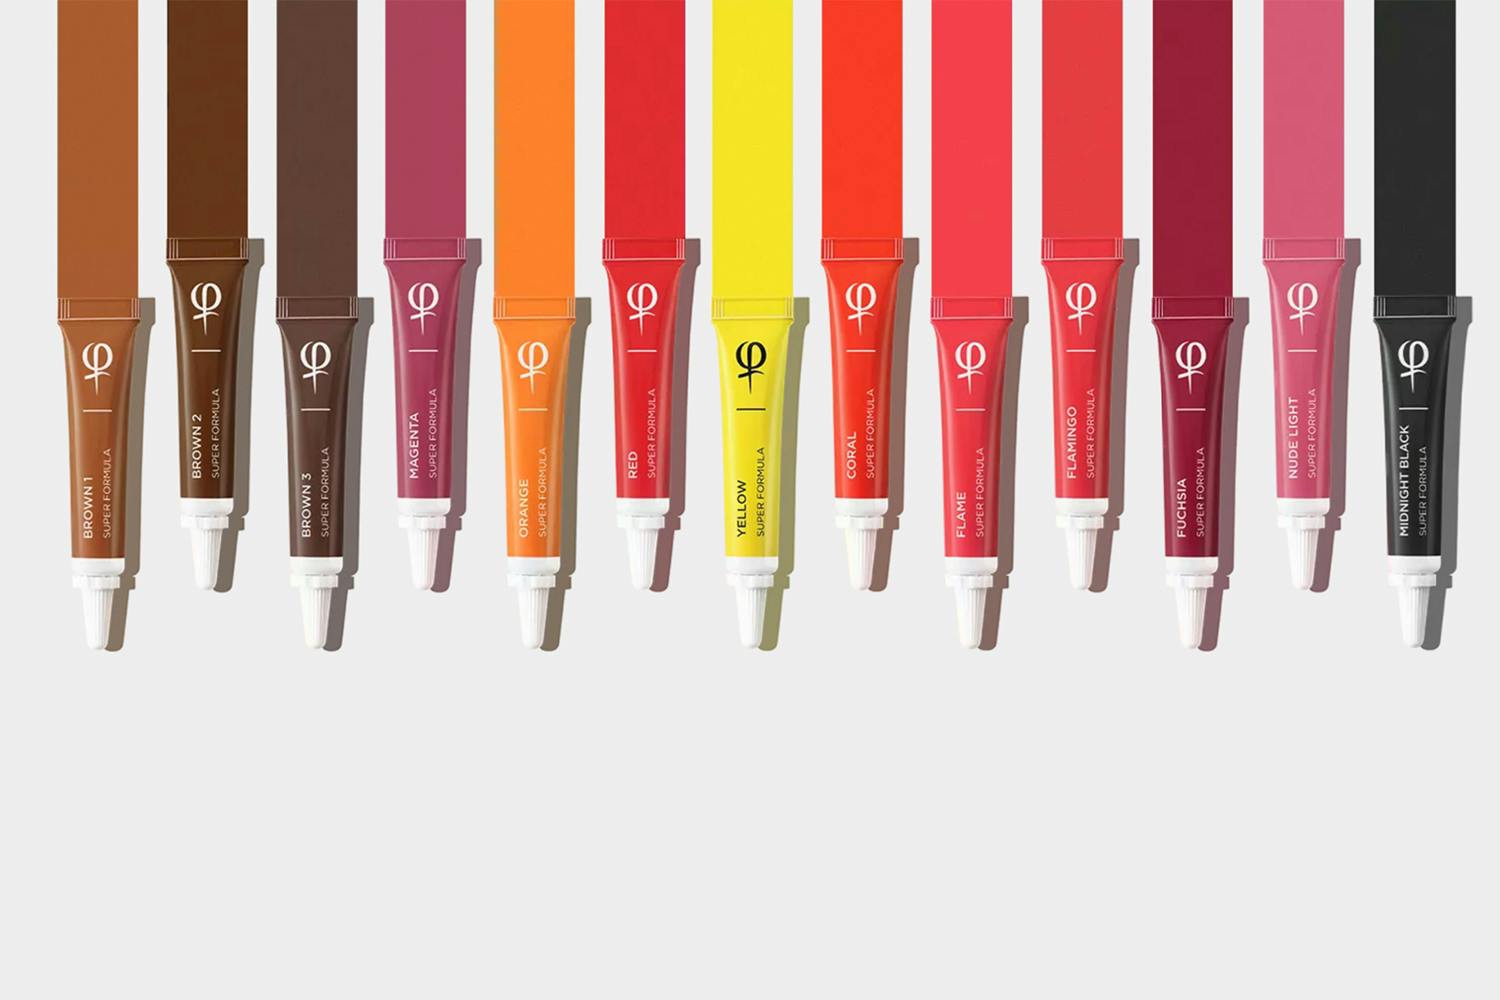 After years of research, and investment in technology, PhiAcademy launched a groundbreaking SUPER pigment specifically made for lip-blushing procedures.